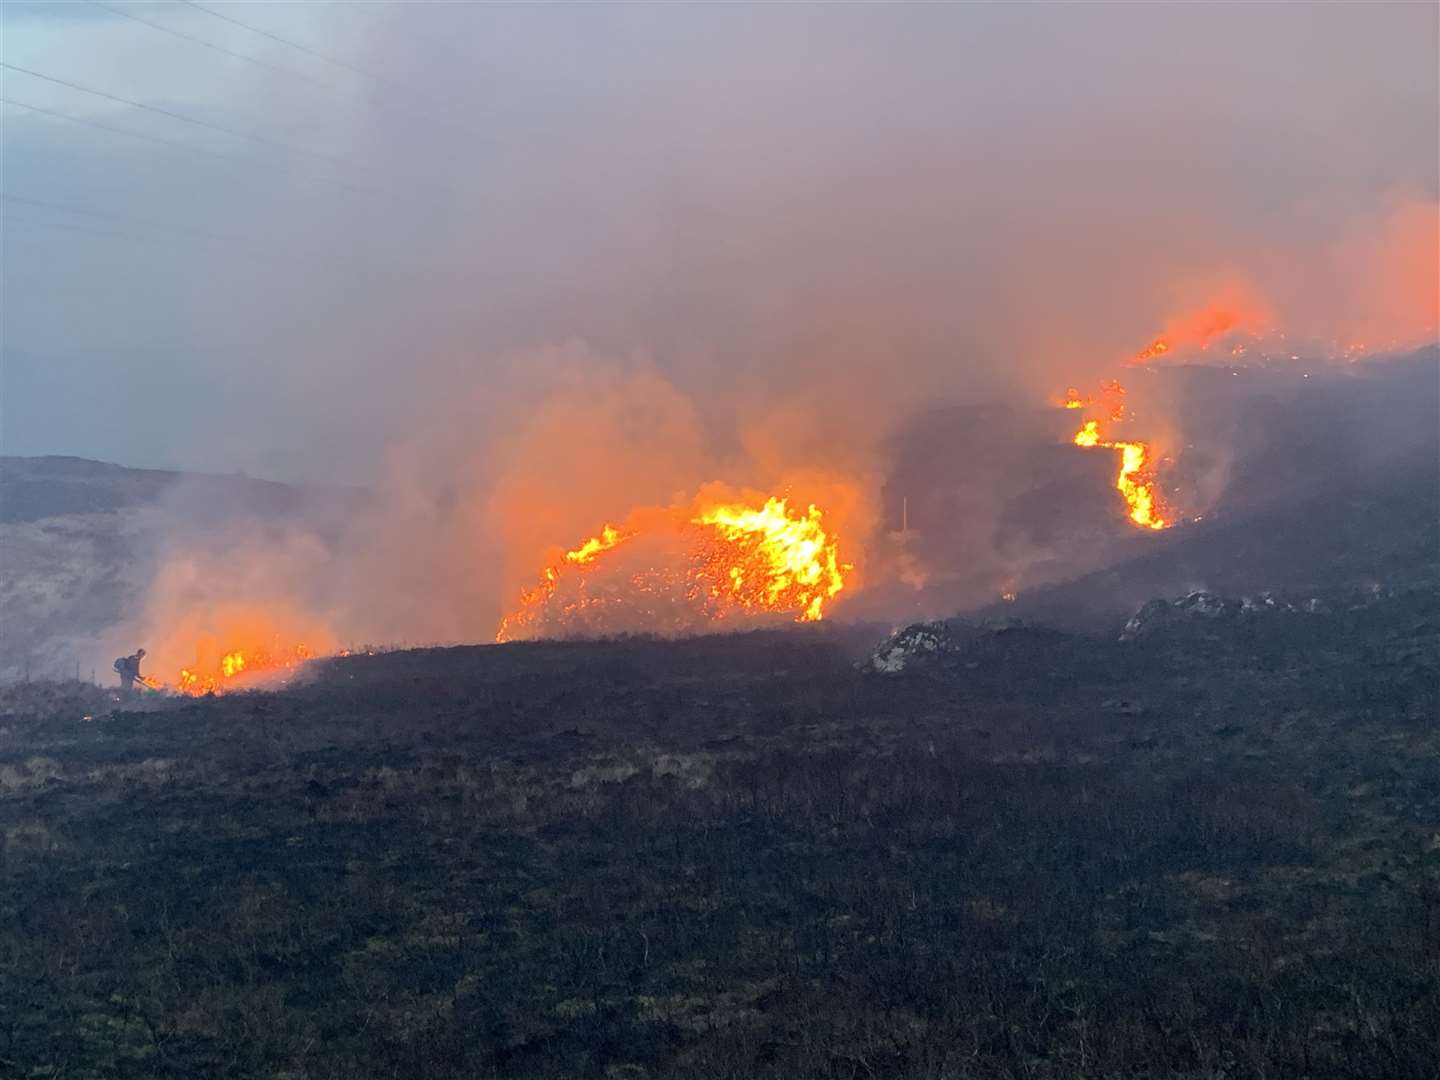 Gamekeepers helped put out a recent wildfire in north Sutherland.